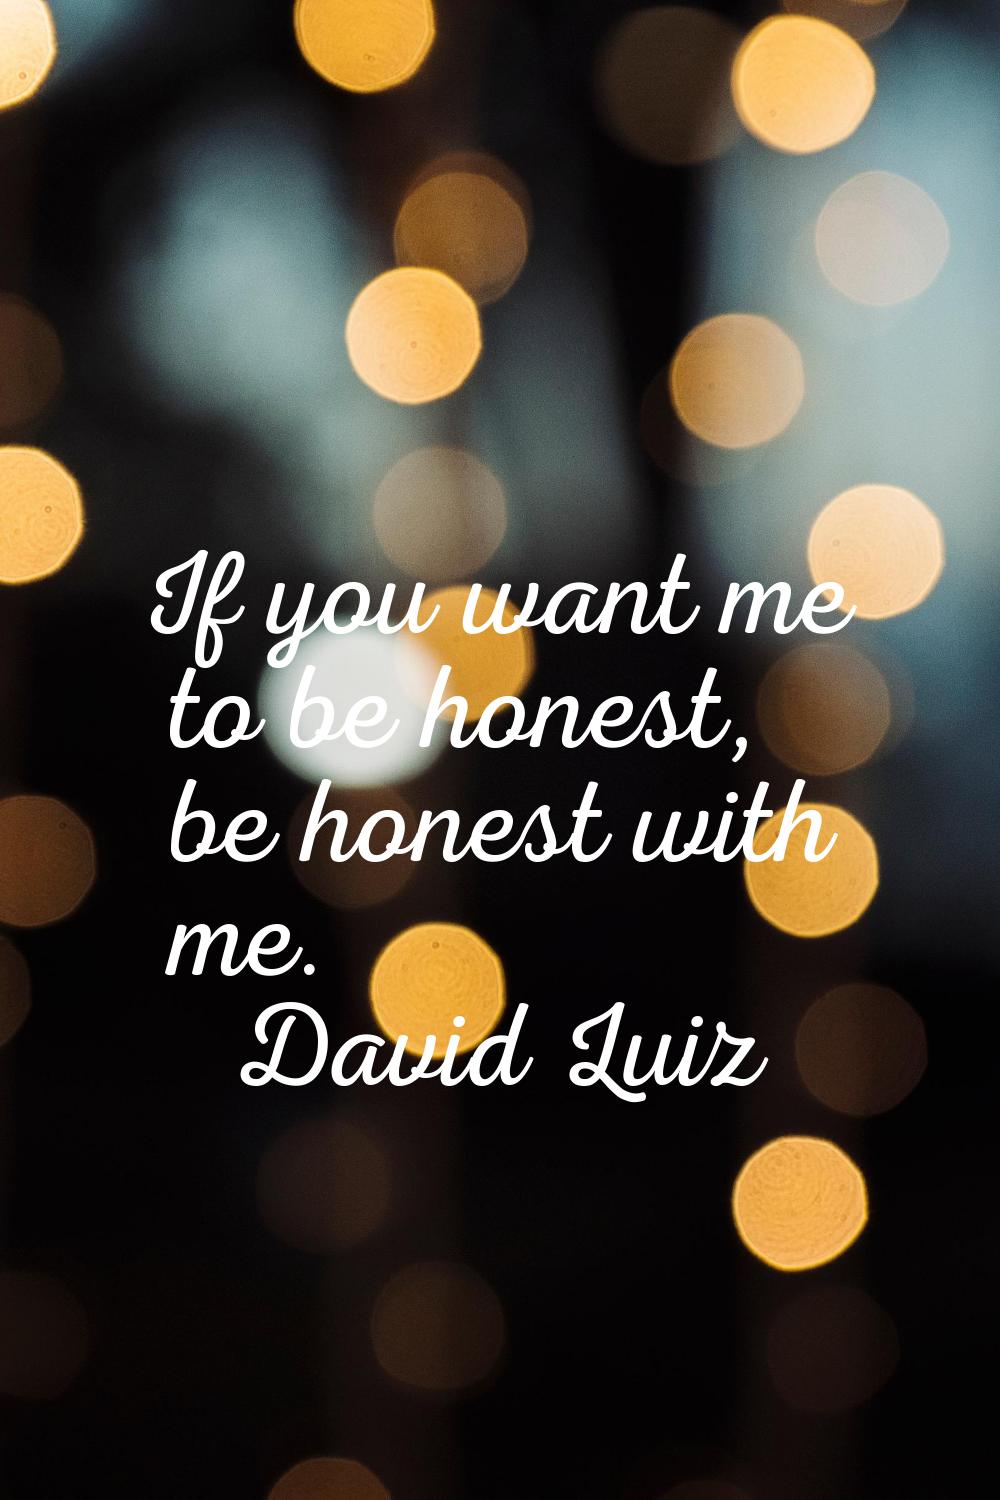 If you want me to be honest, be honest with me.